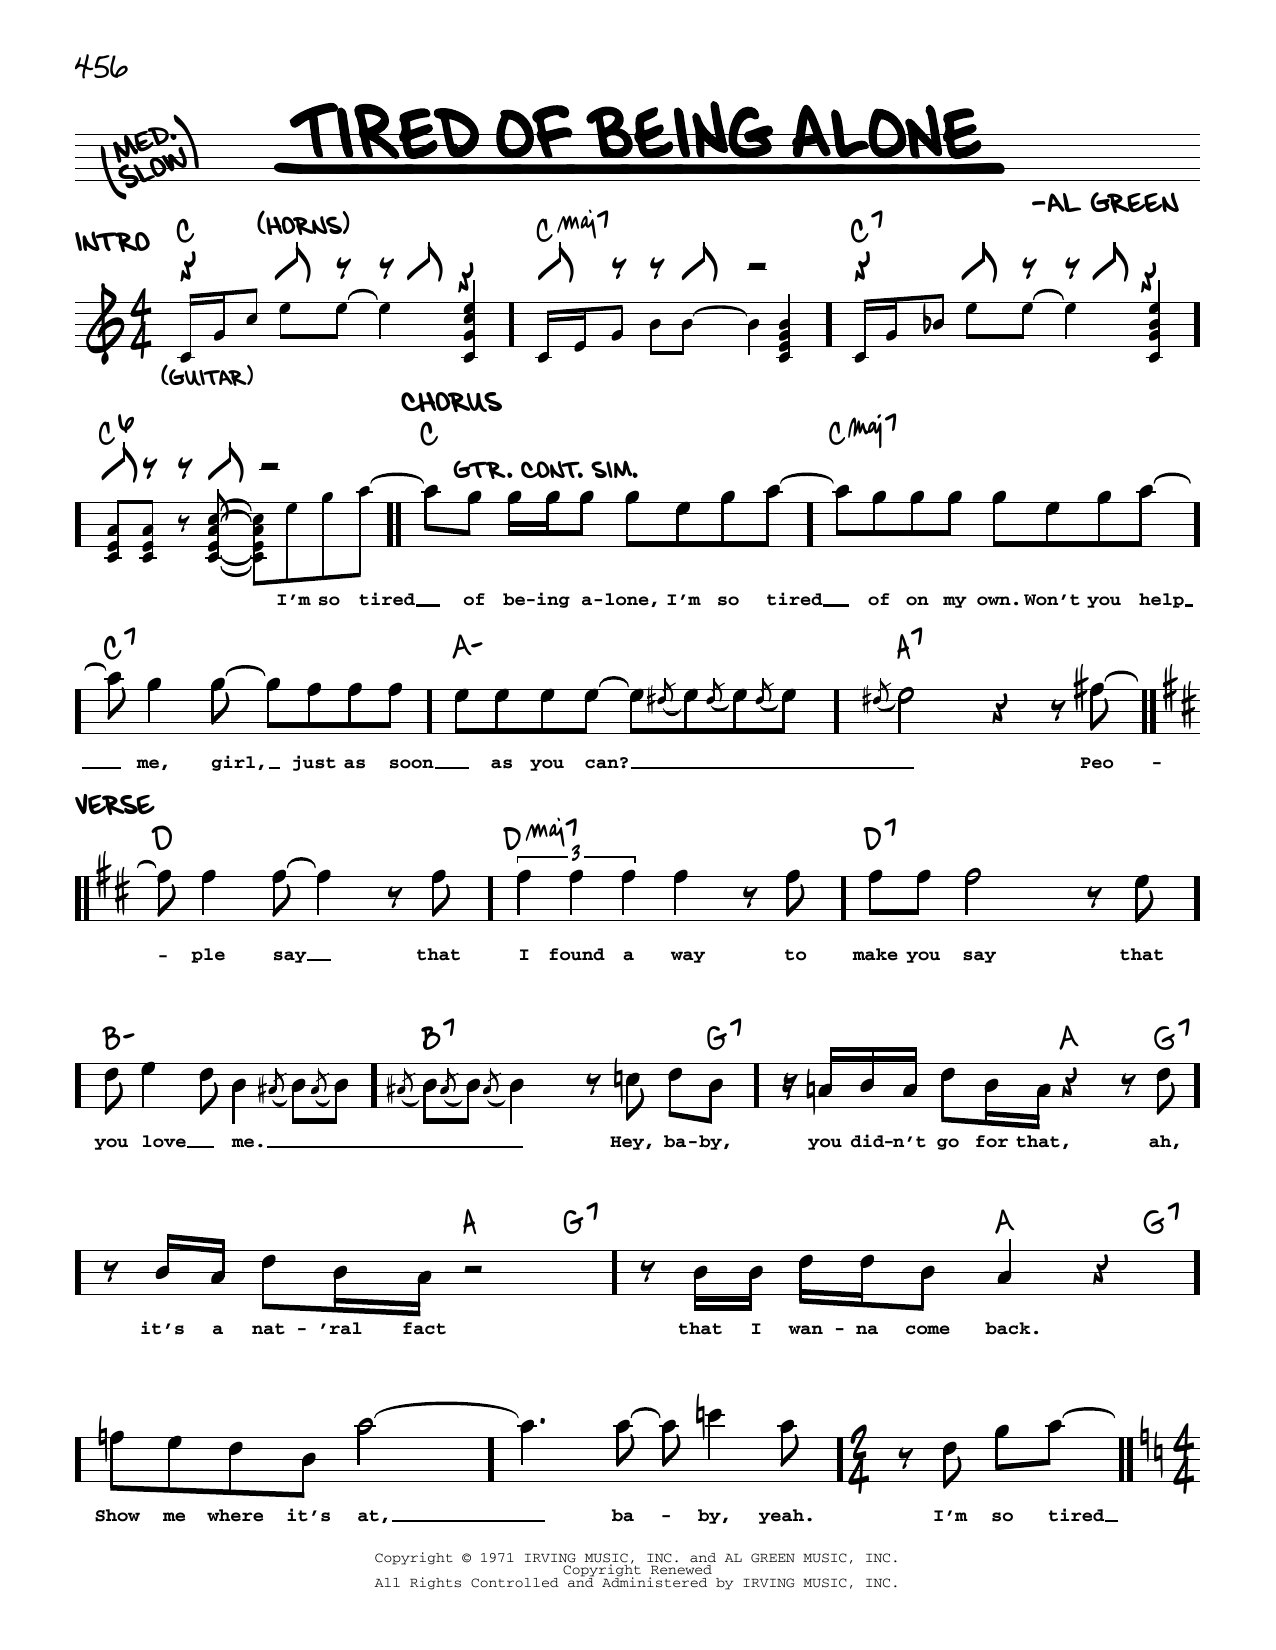 Al Green Tired Of Being Alone sheet music notes and chords. Download Printable PDF.